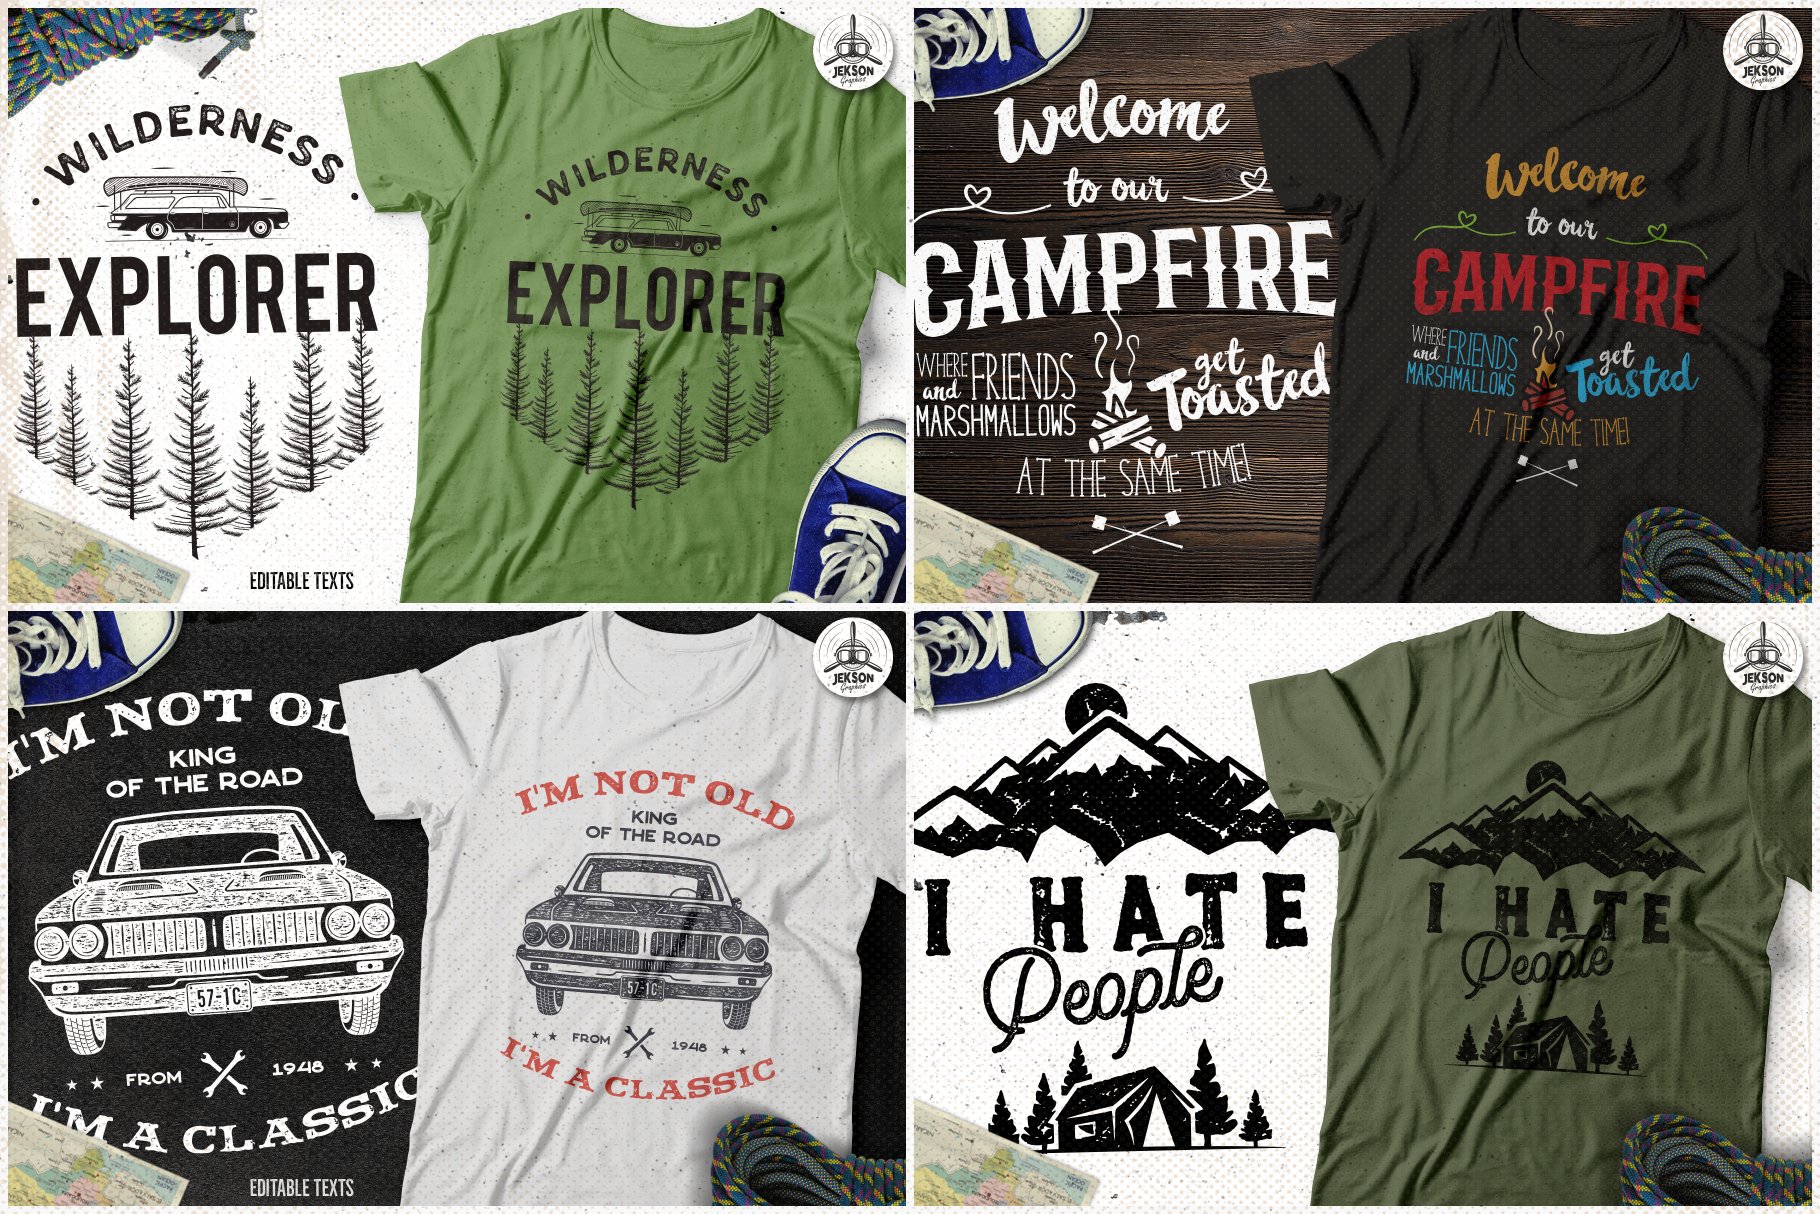 Green and brown t-shirts with camping illustration.